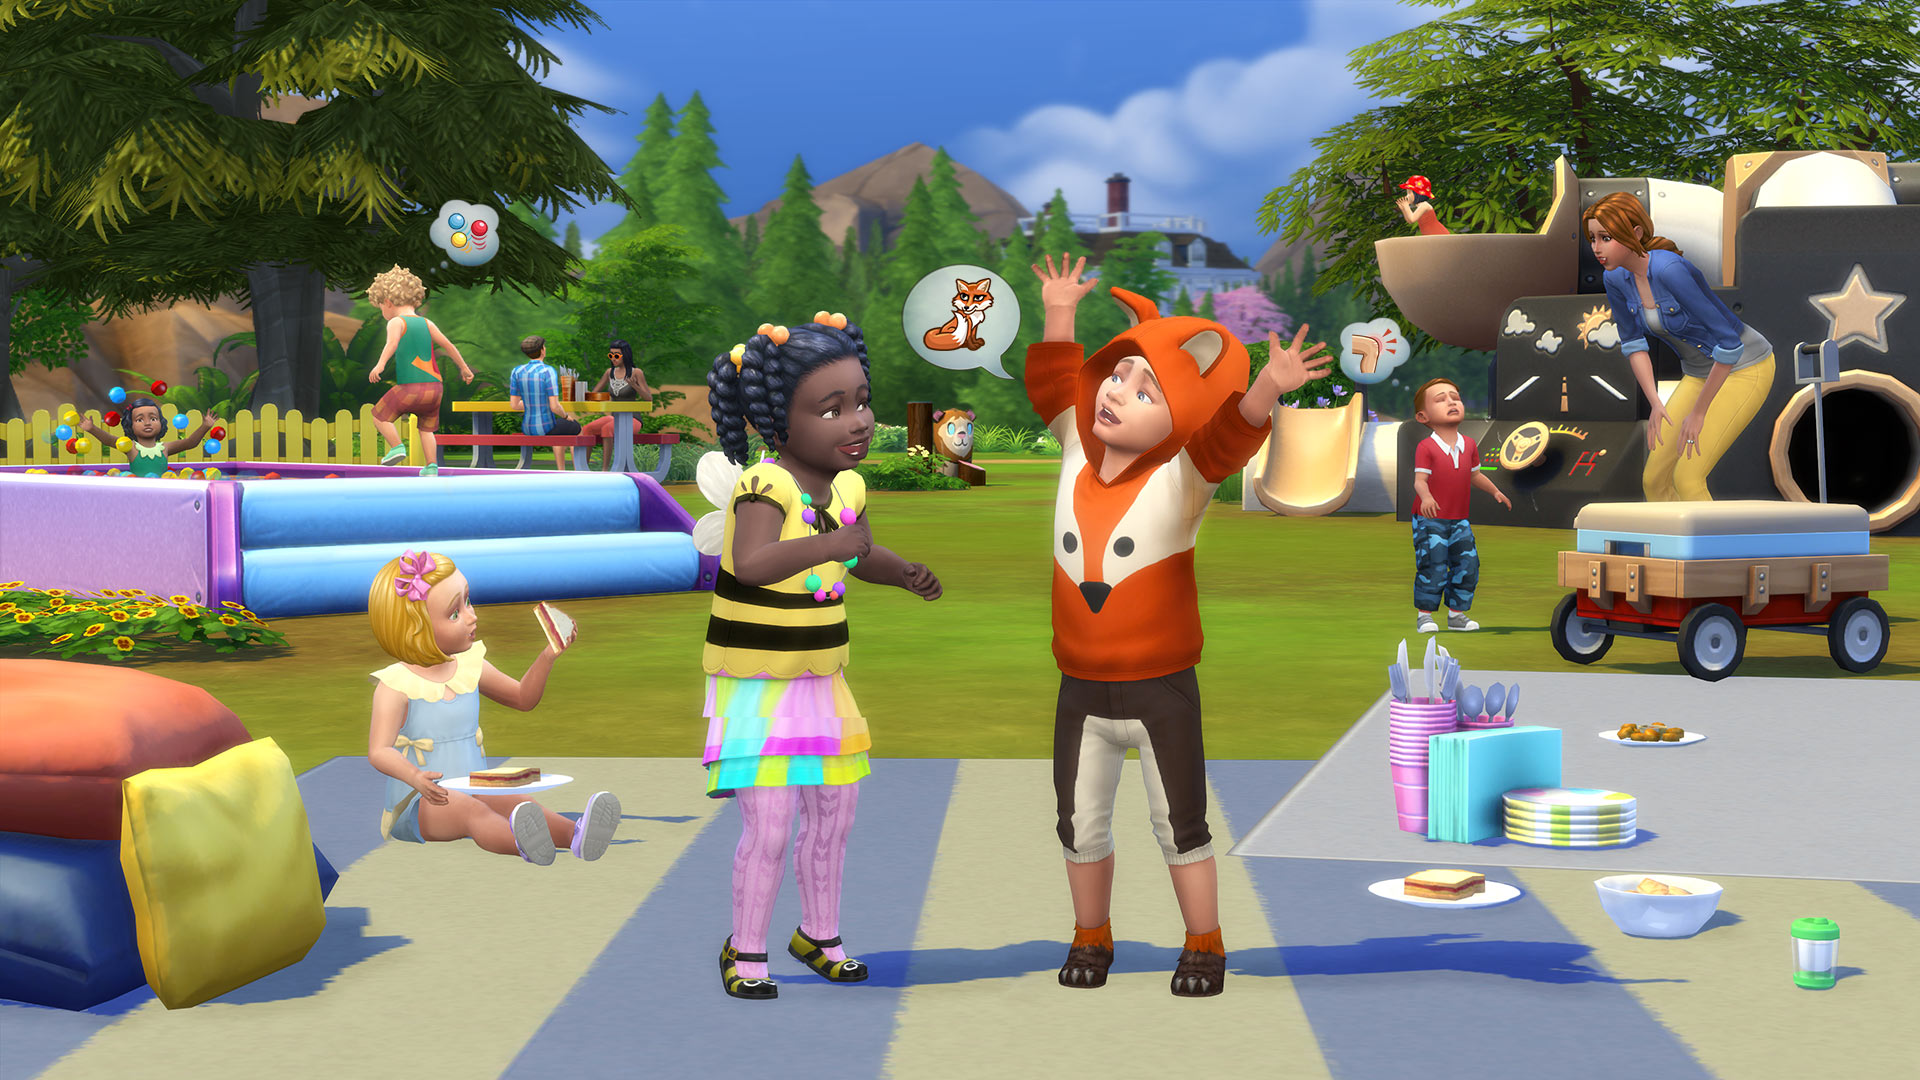 NEWS ~ TS4: It's About To Get More Adorable With The Sims 4 Toddler Stuff, Coming Soon!